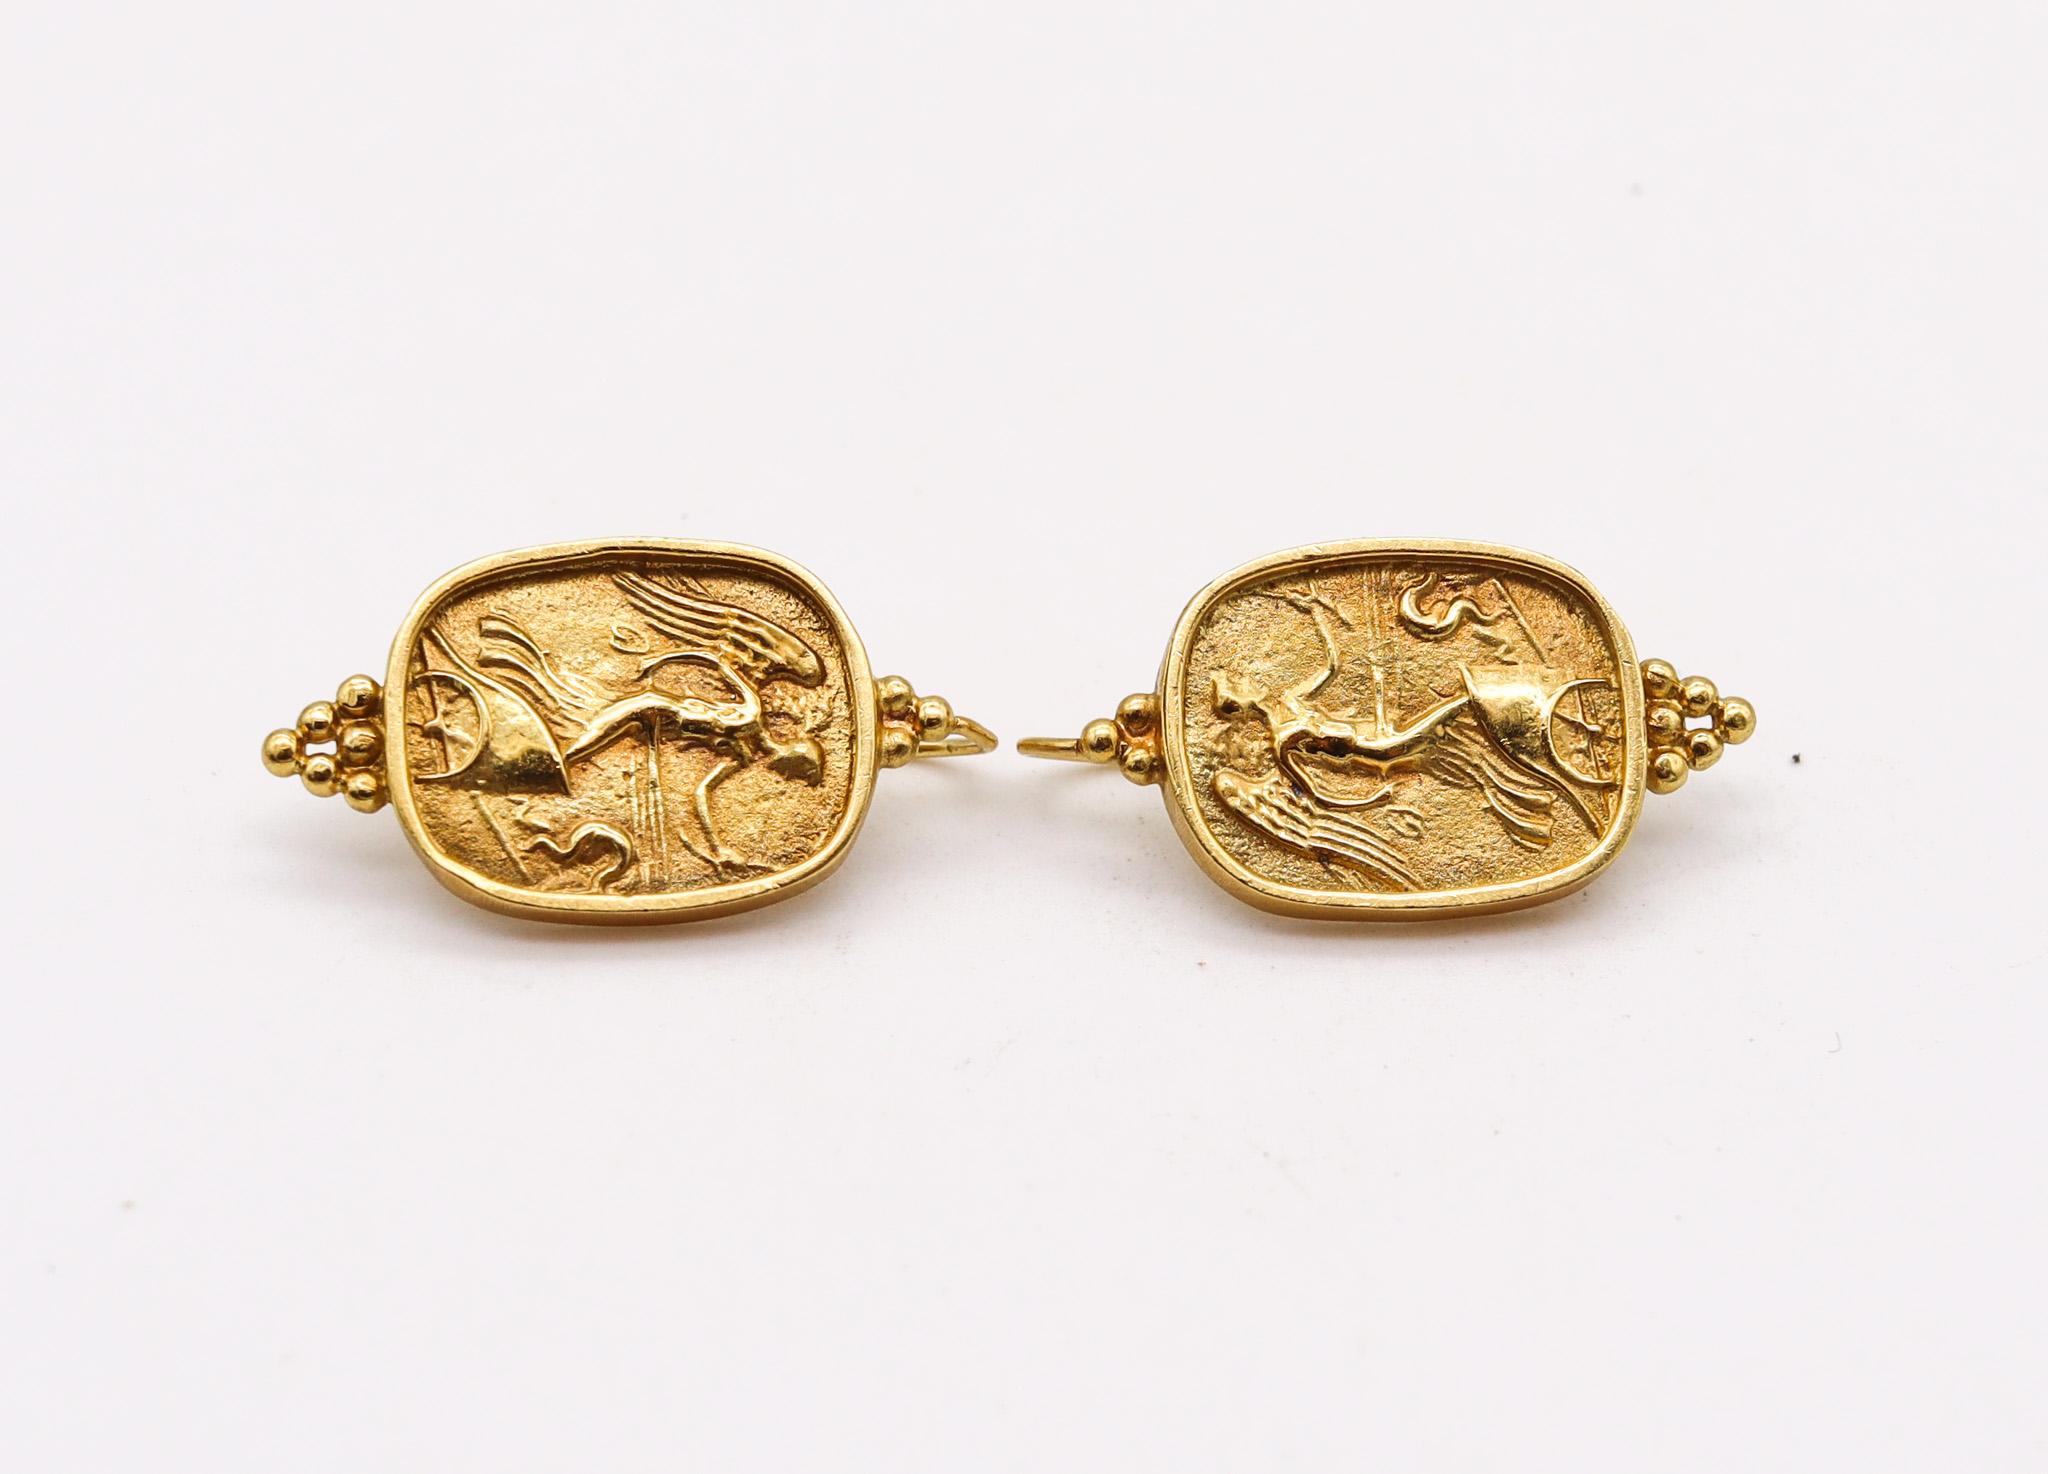 Roman revival earrings designed by SeidenGang.

Beautiful vintage pieces, made by the jewelry designer's SeidenGang. These pair of drop earrings was part of the iconic Etruscan-Roman revivals collection, the design depicts the draped winged figure